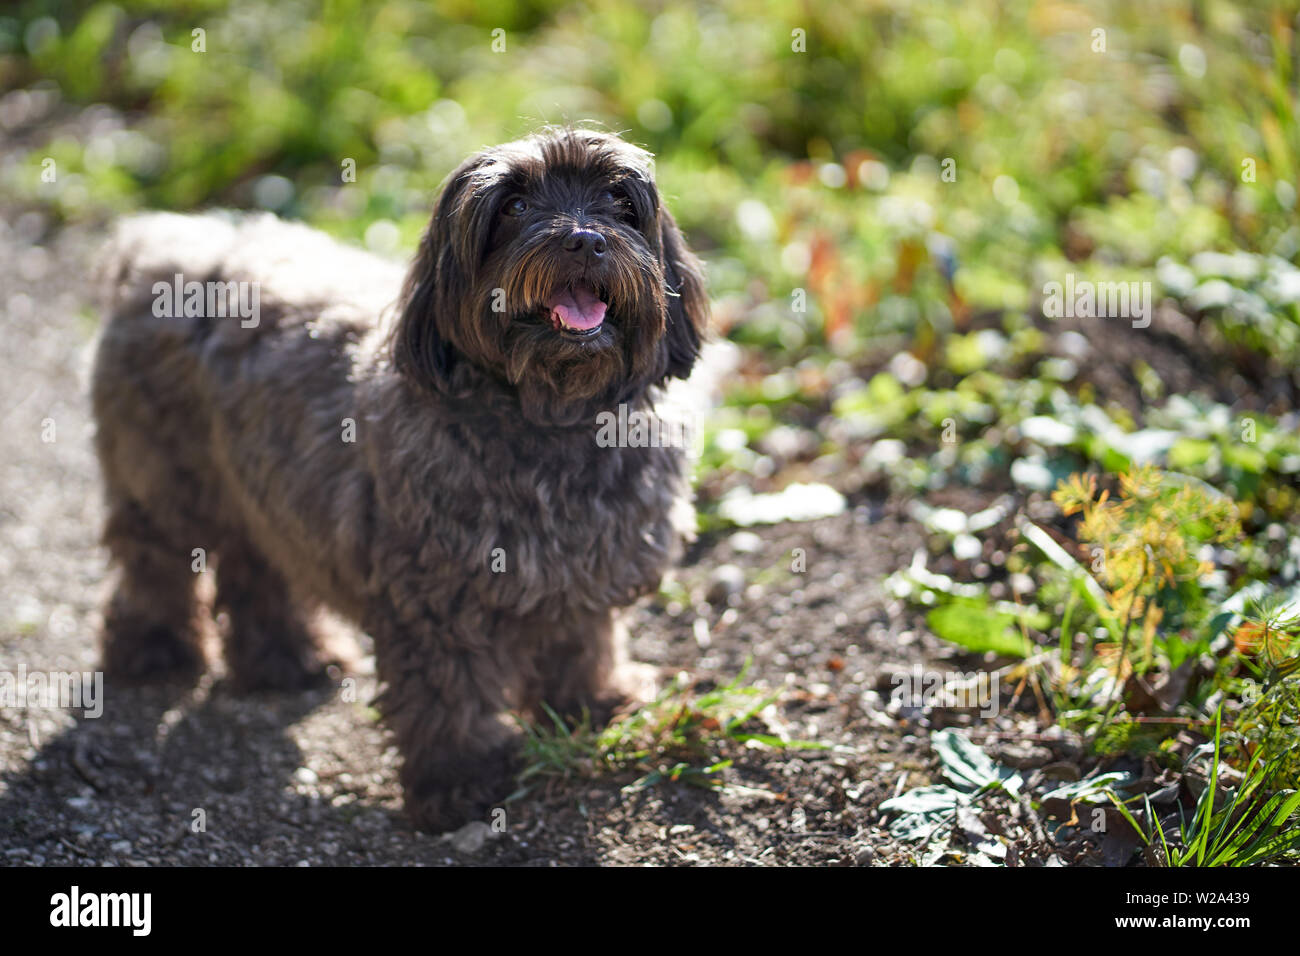 Black havenese dog looking up outdoors meadows Stock Photo